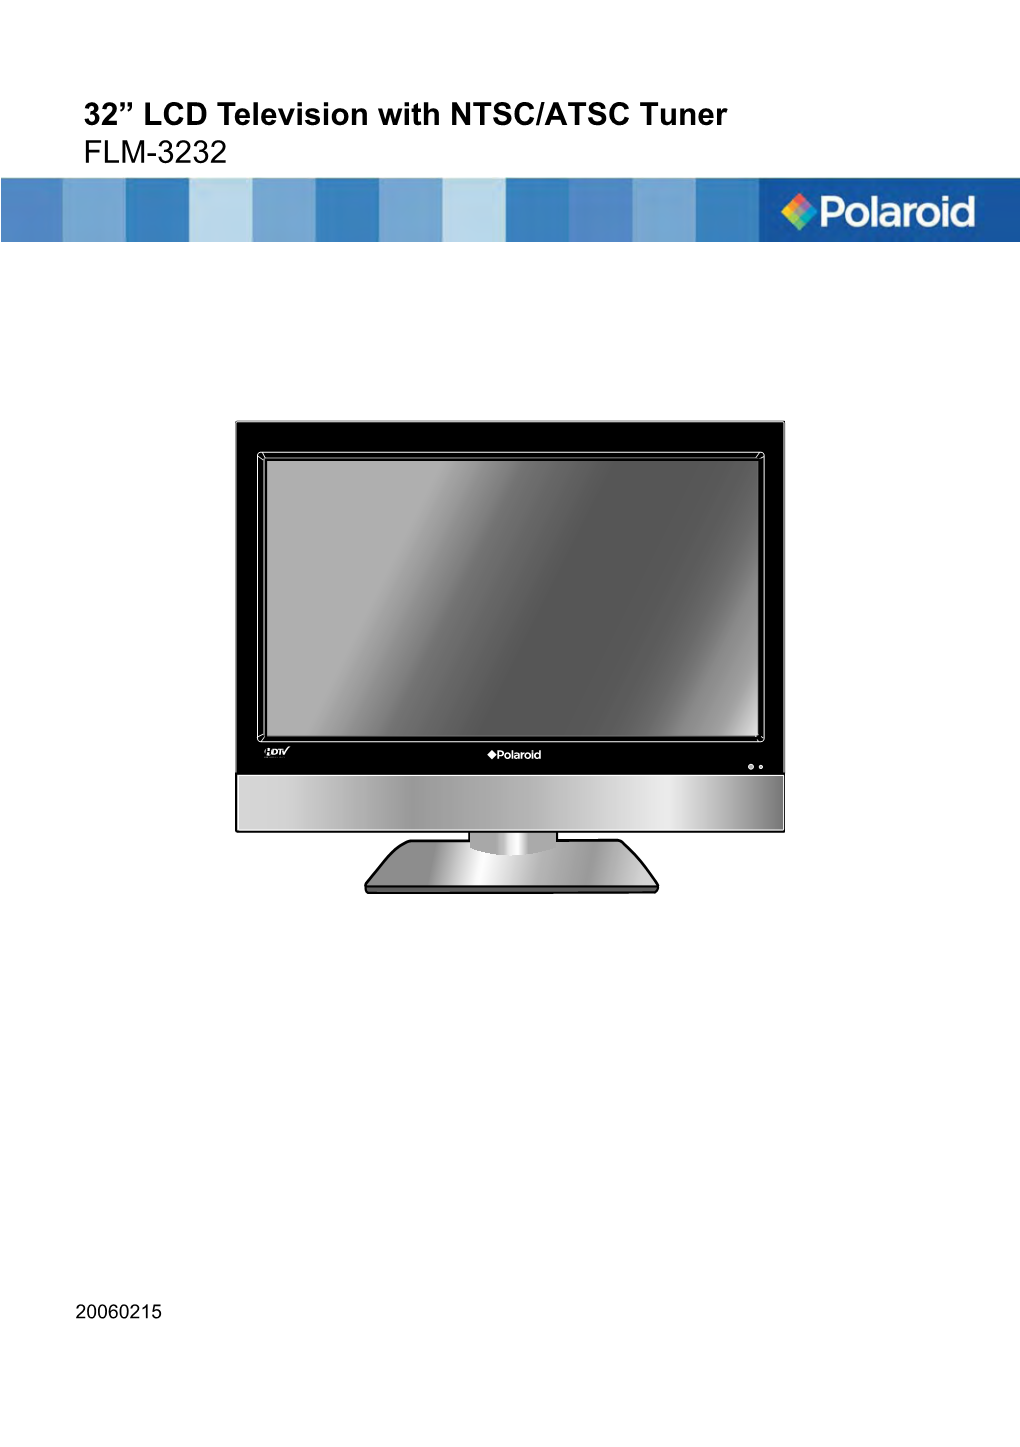 32” LCD Television with NTSC/ATSC Tuner FLM-3232